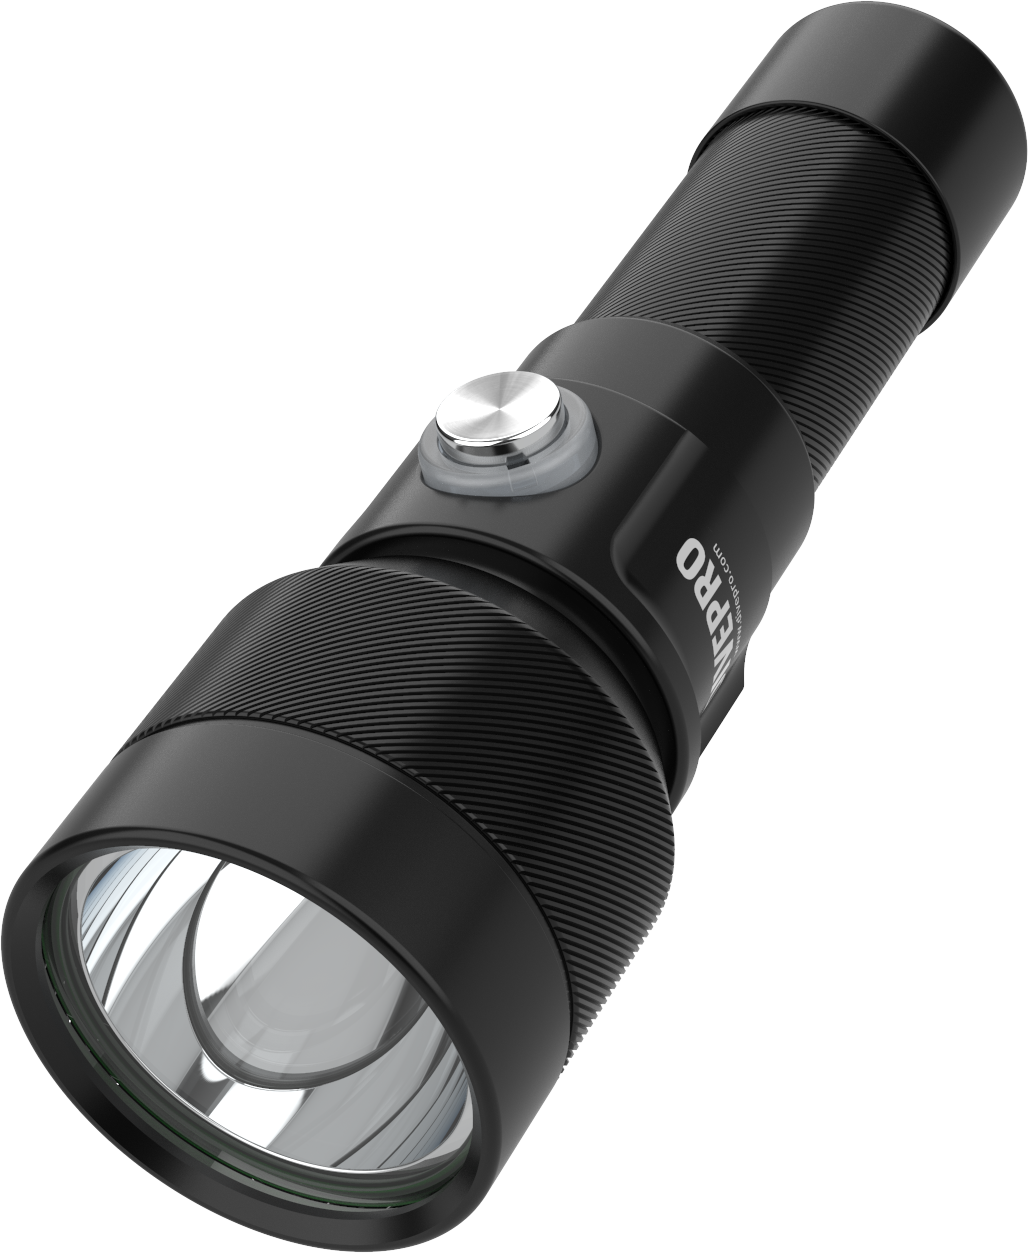 Divepro Divepro S26 2600 lumen Super Compact Diving Torch - Switch Operated inc battery/charger - Oyster Diving